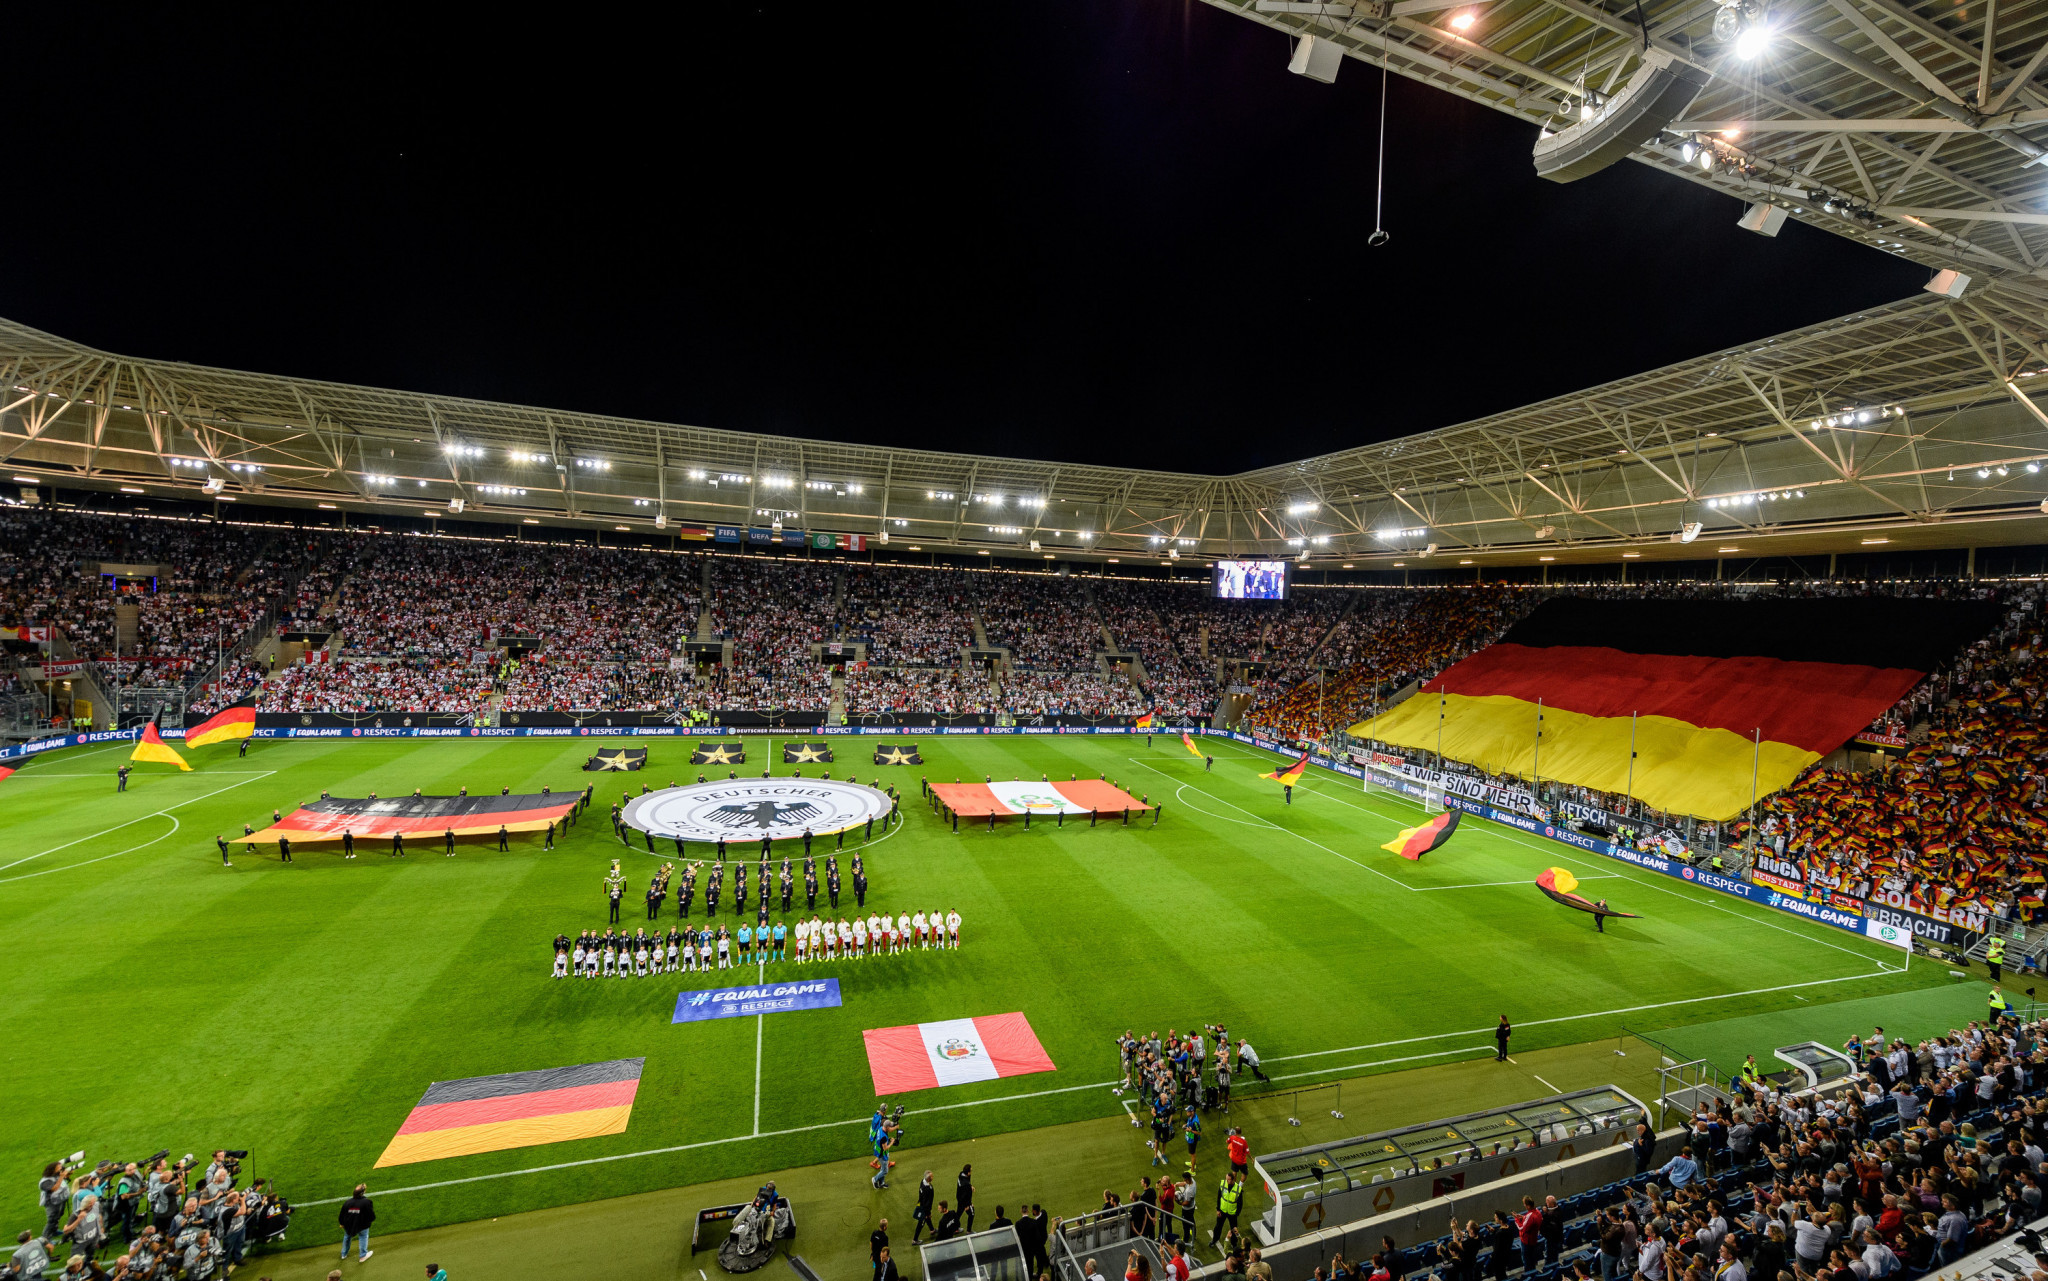 The DFB have been accused of moving the match to avoid negative publicity prior to the Euro 2024 vote ©Getty Images